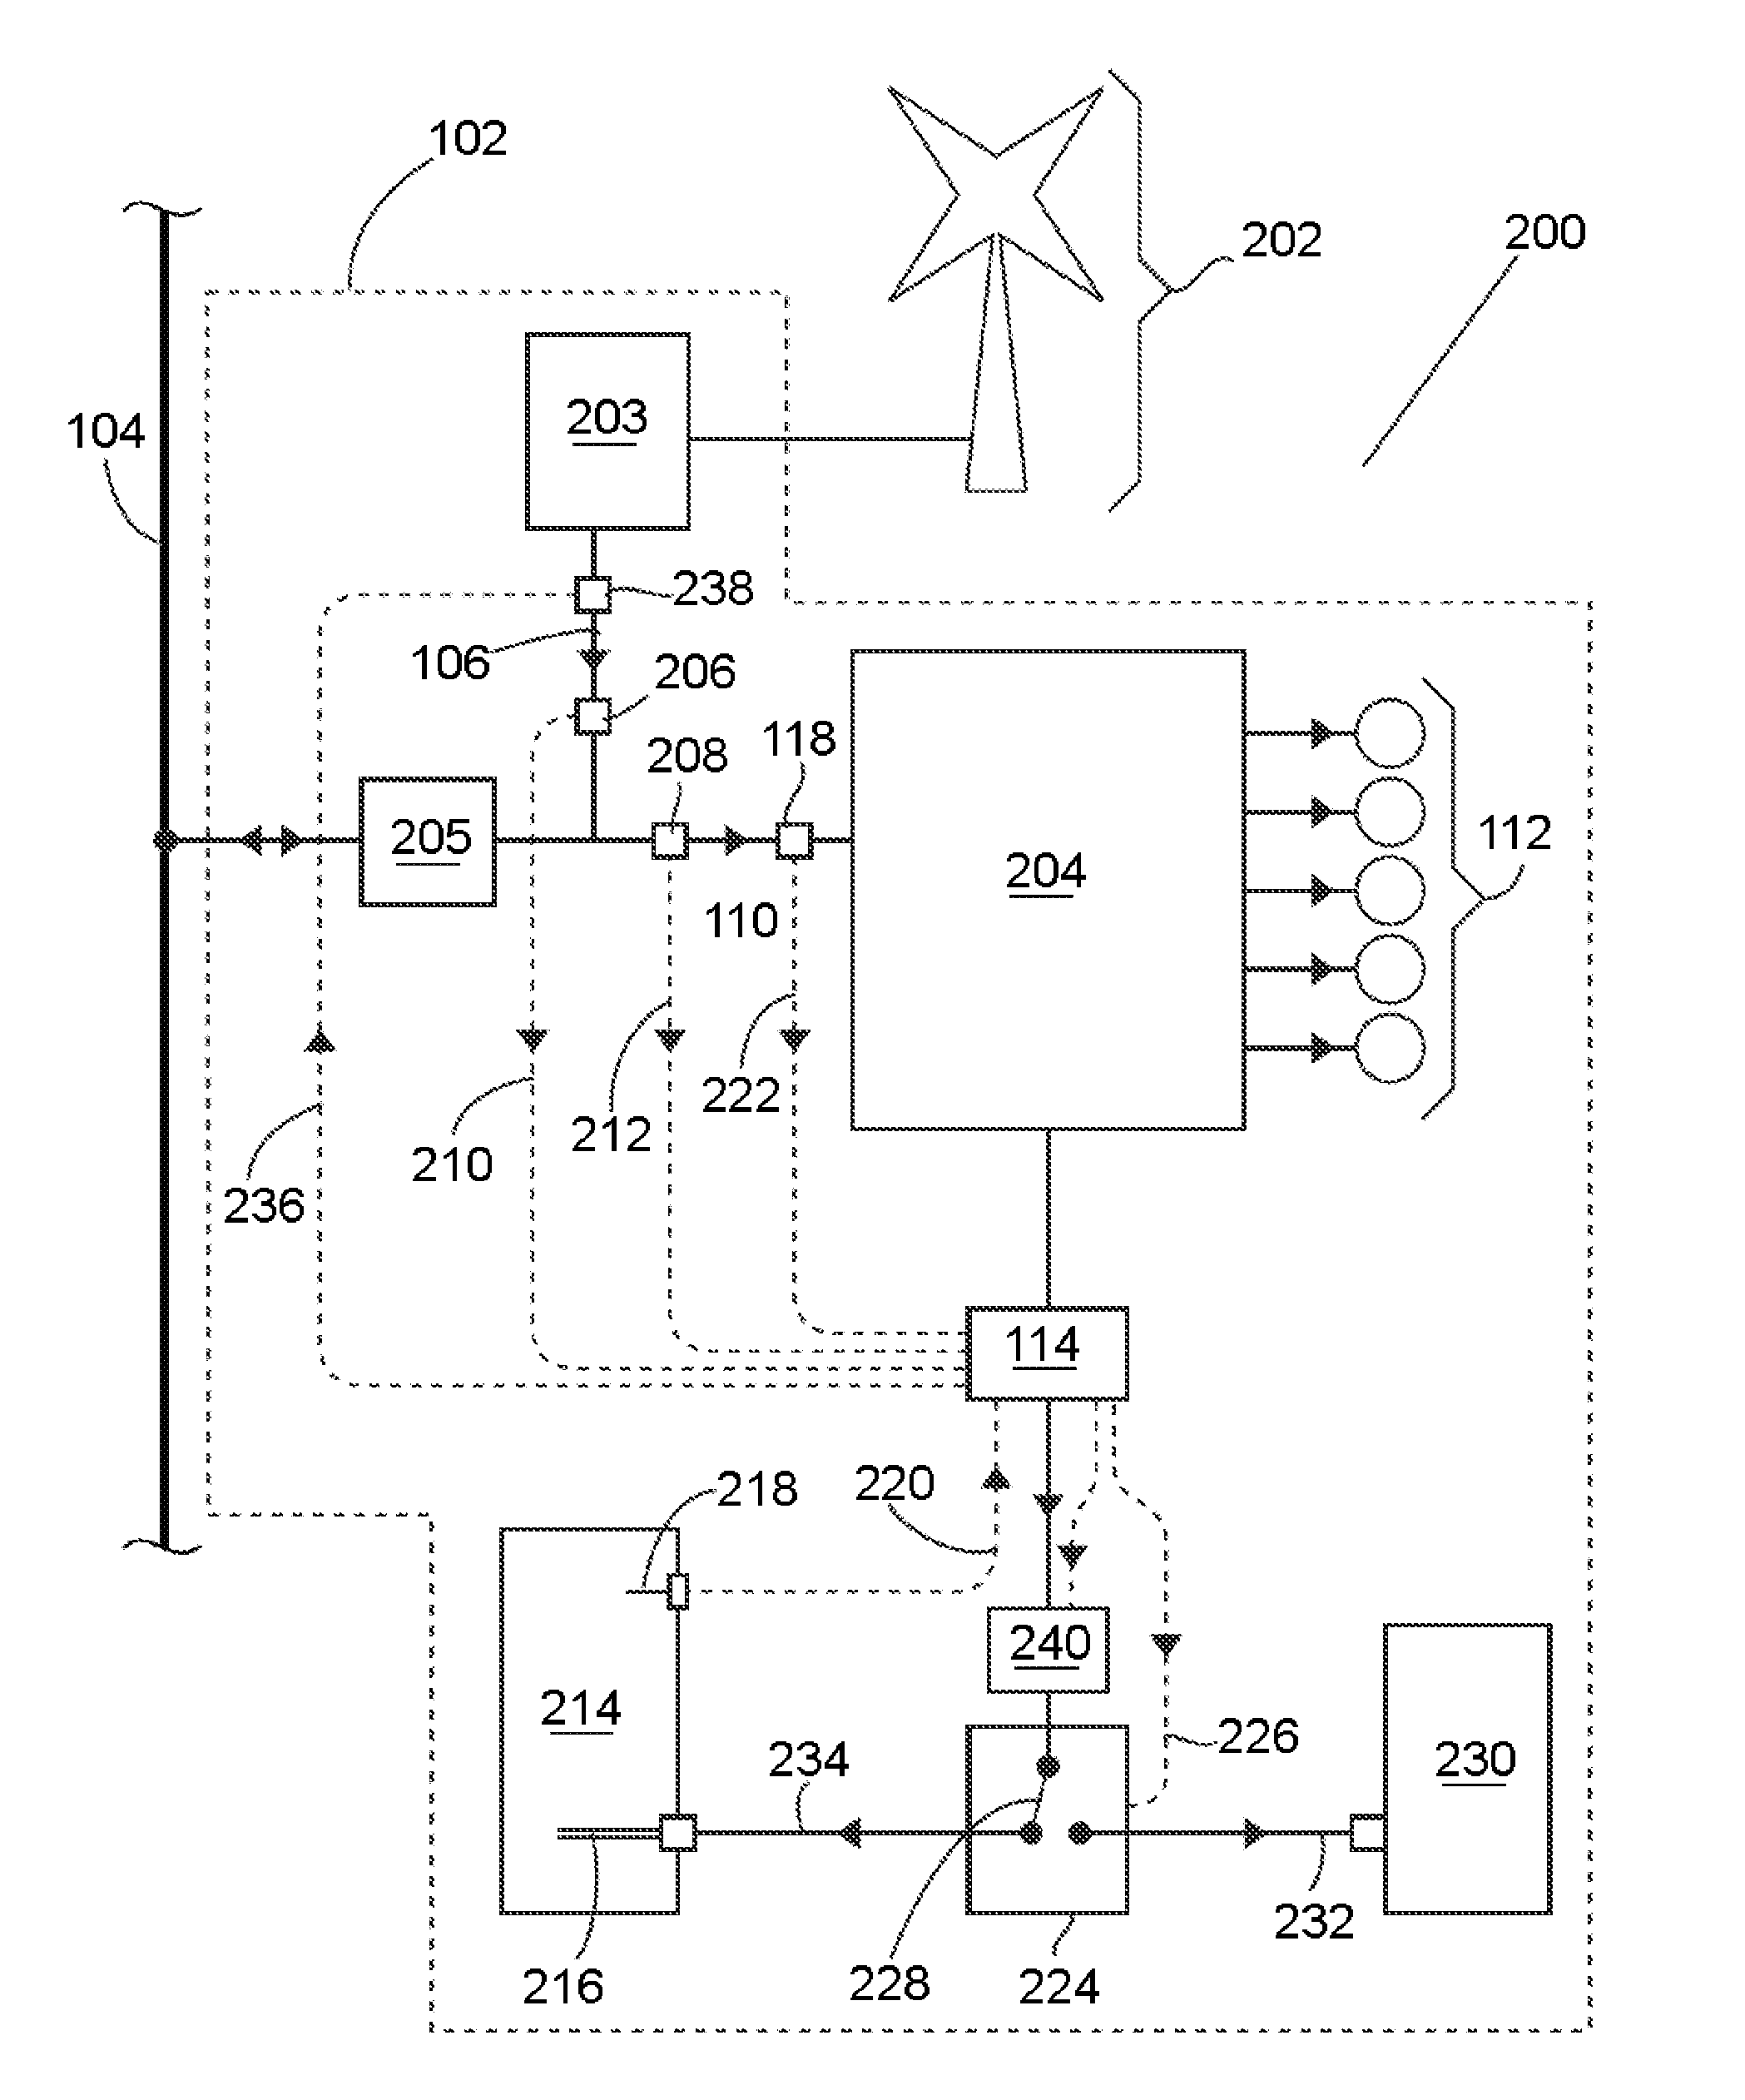 Method and system for managing an electrical load of a user facility based on locally measured conditions of an electricity supply grid